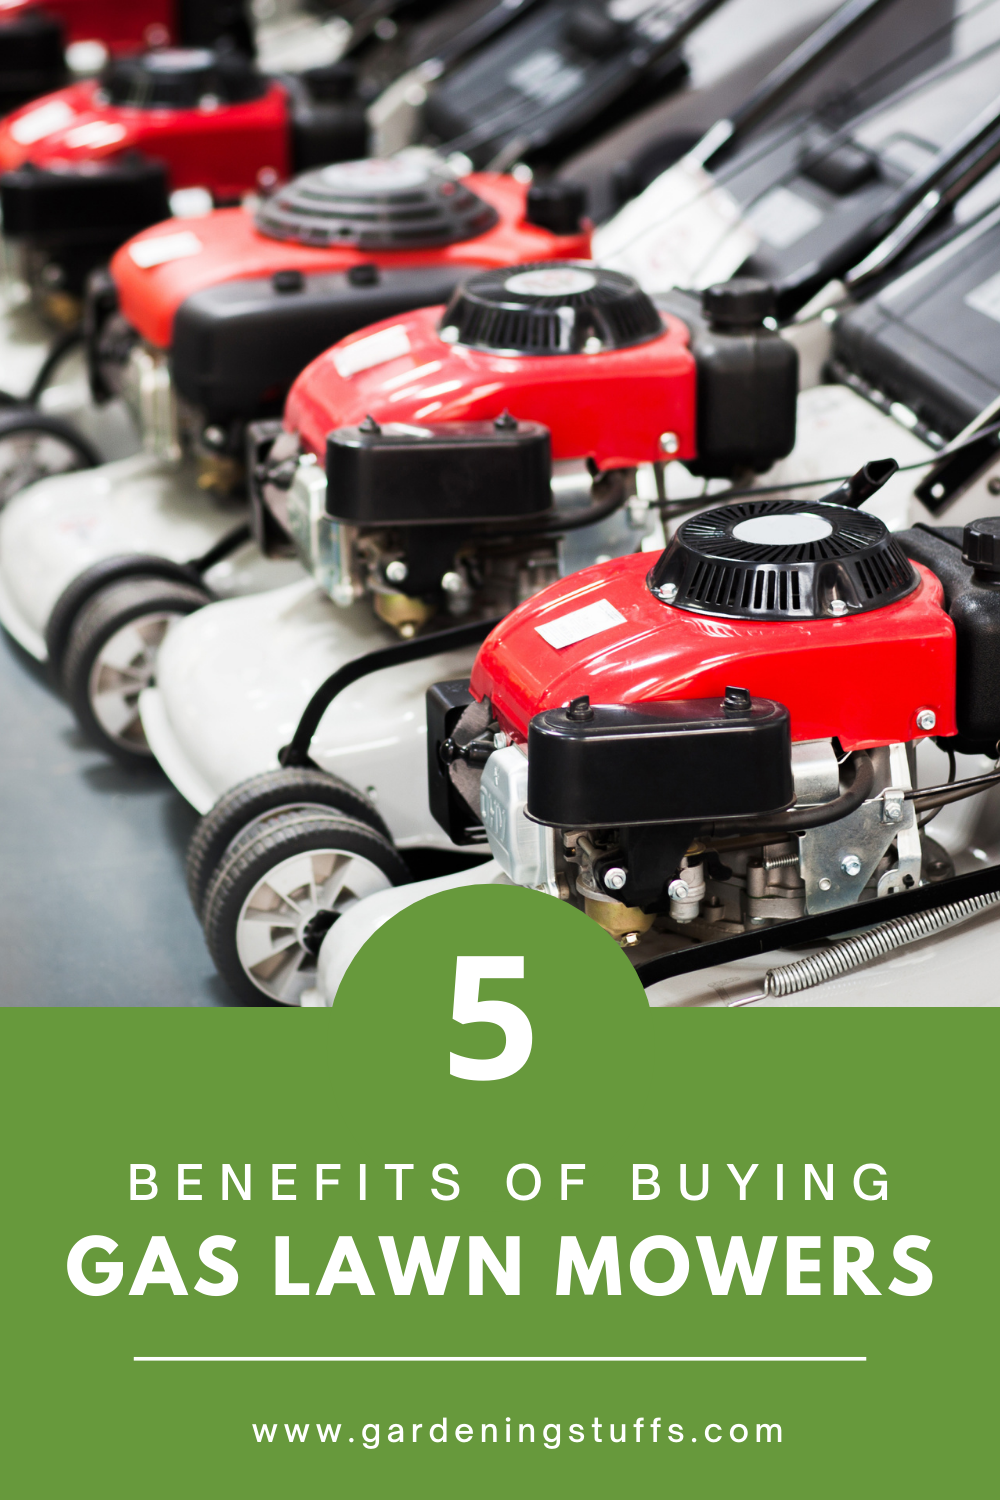 When you decide to buy a lawn mower, you might hesitate between electric and gas lawn mowers. In this article, we discuss the advantages of buying a gas lawn mower to help you decide choosing the best one.